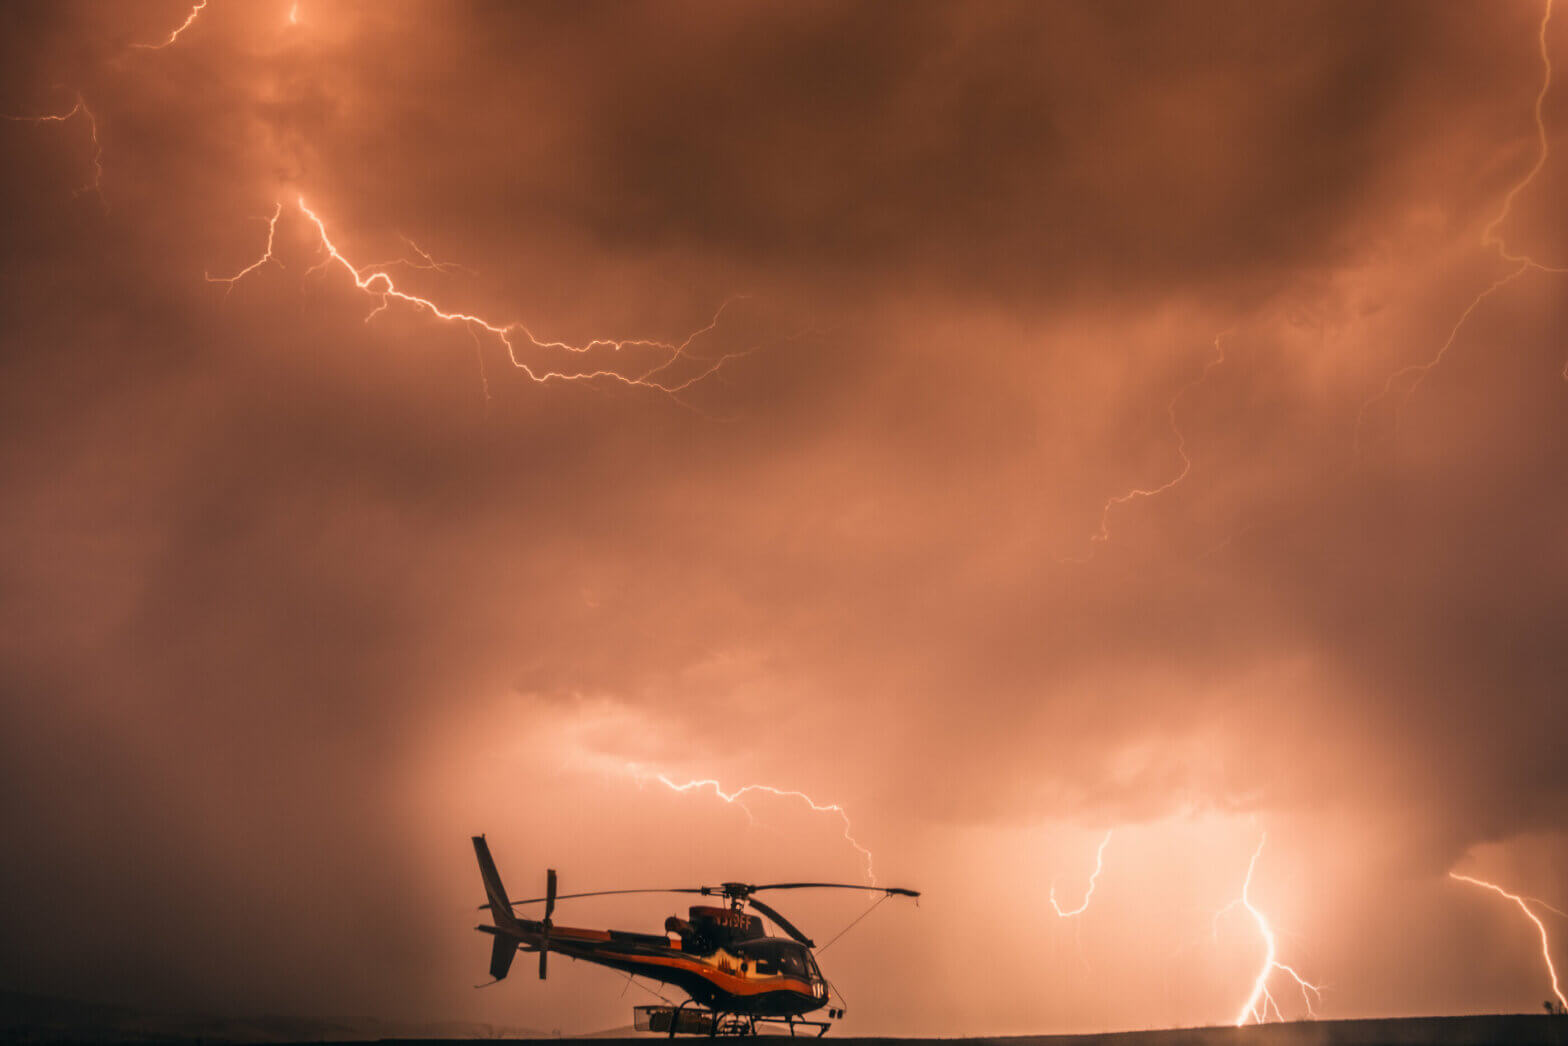 How can aviators detect and avoid lightning?